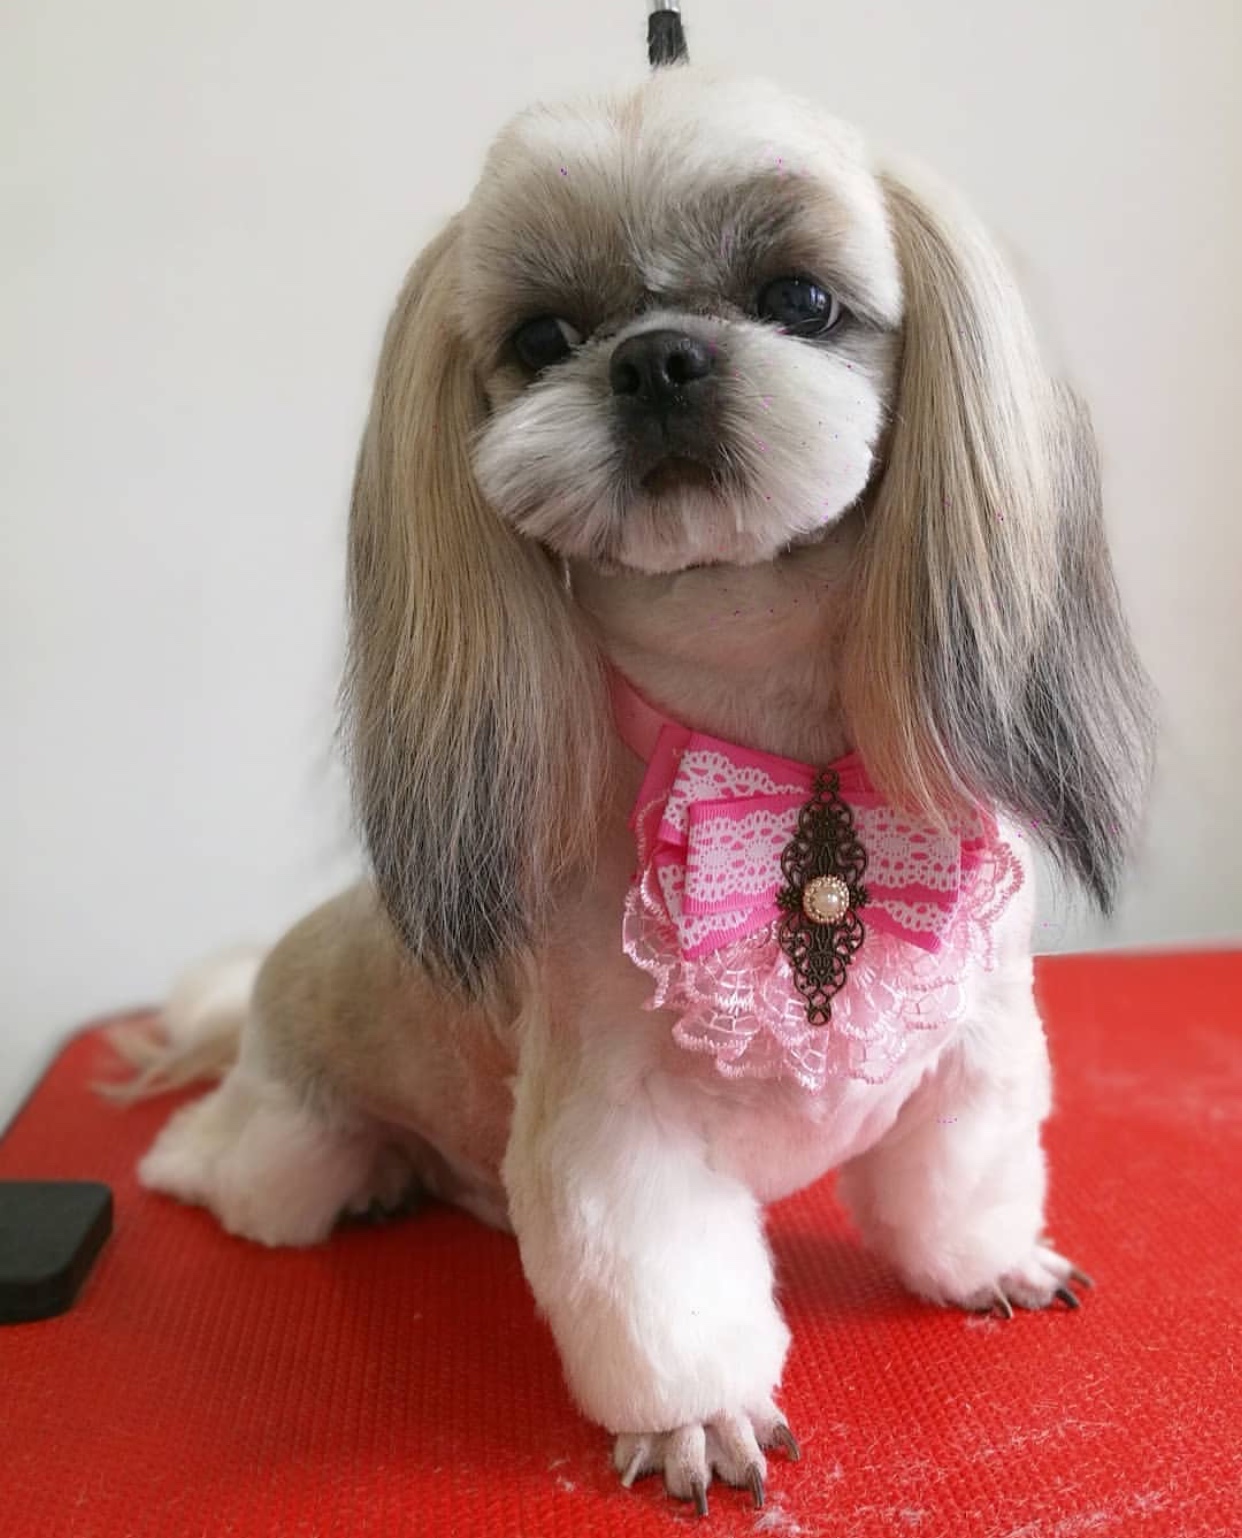 A Shih Tzu with a long hair on its ears sitting on top of the grooming table